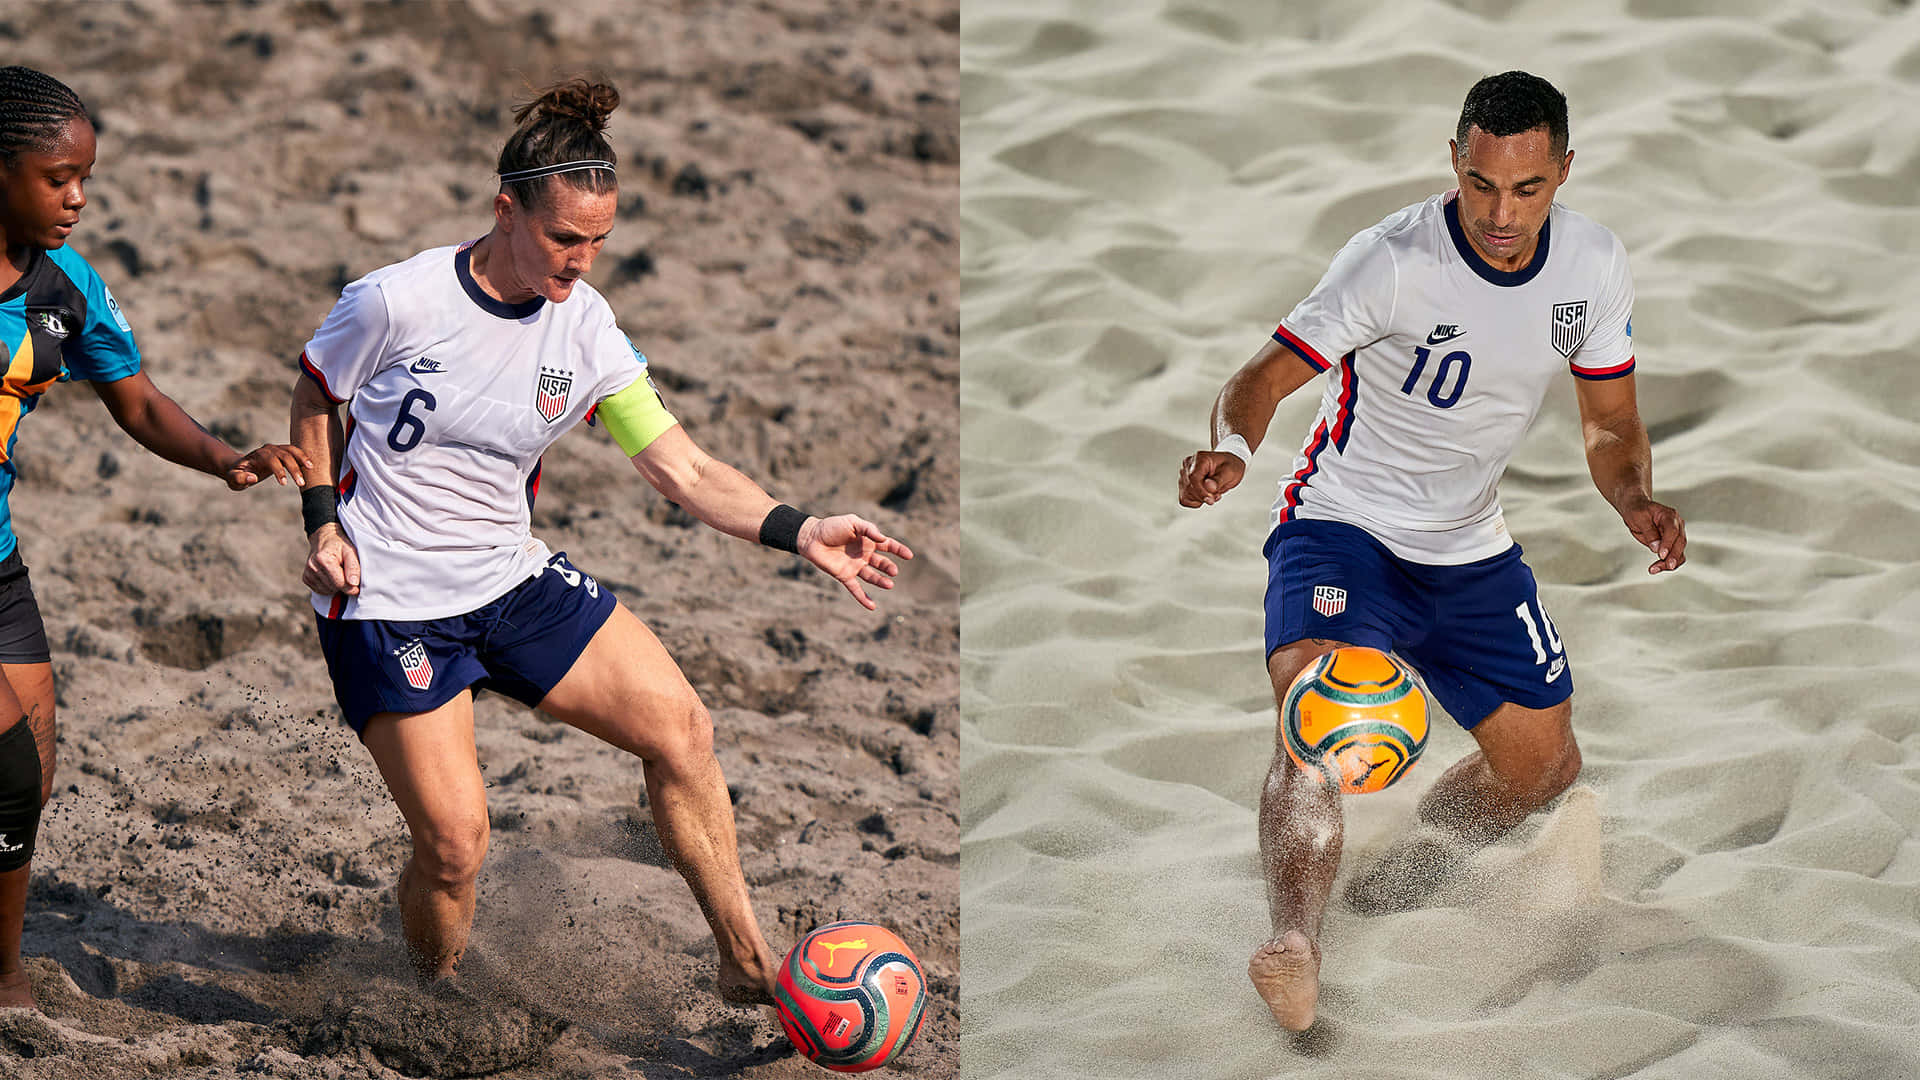 Beach Soccer Action Players Competing.jpg Wallpaper